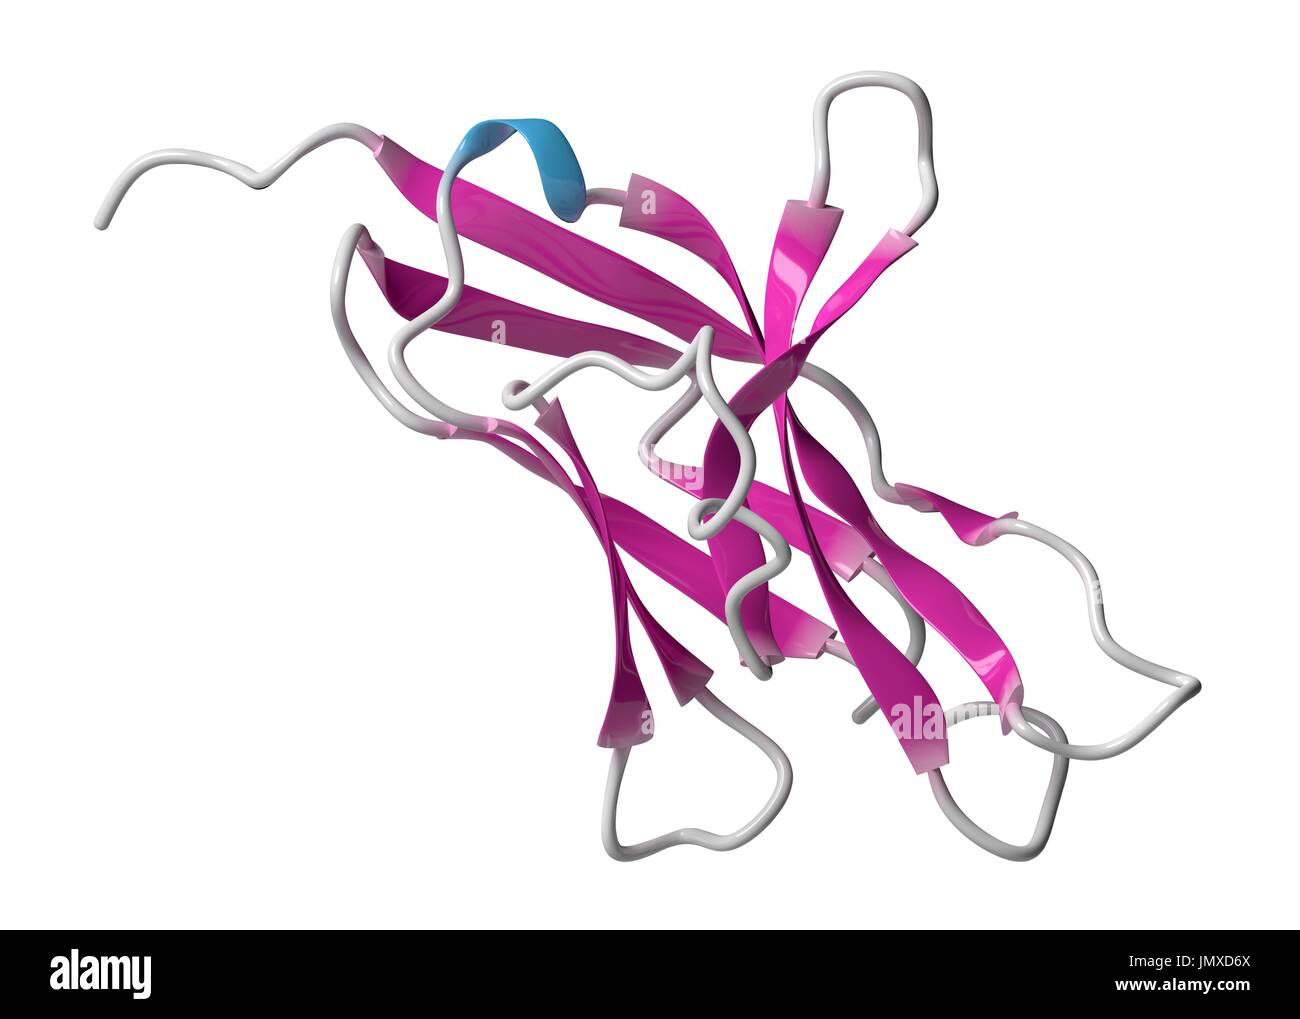 Programmed cell death 1 (PD-1, CD279) receptor protein. PD-1 is a major cancer drug target. Cartoon model, secondary structure colouring (helices blue, sheets pink). Stock Photo